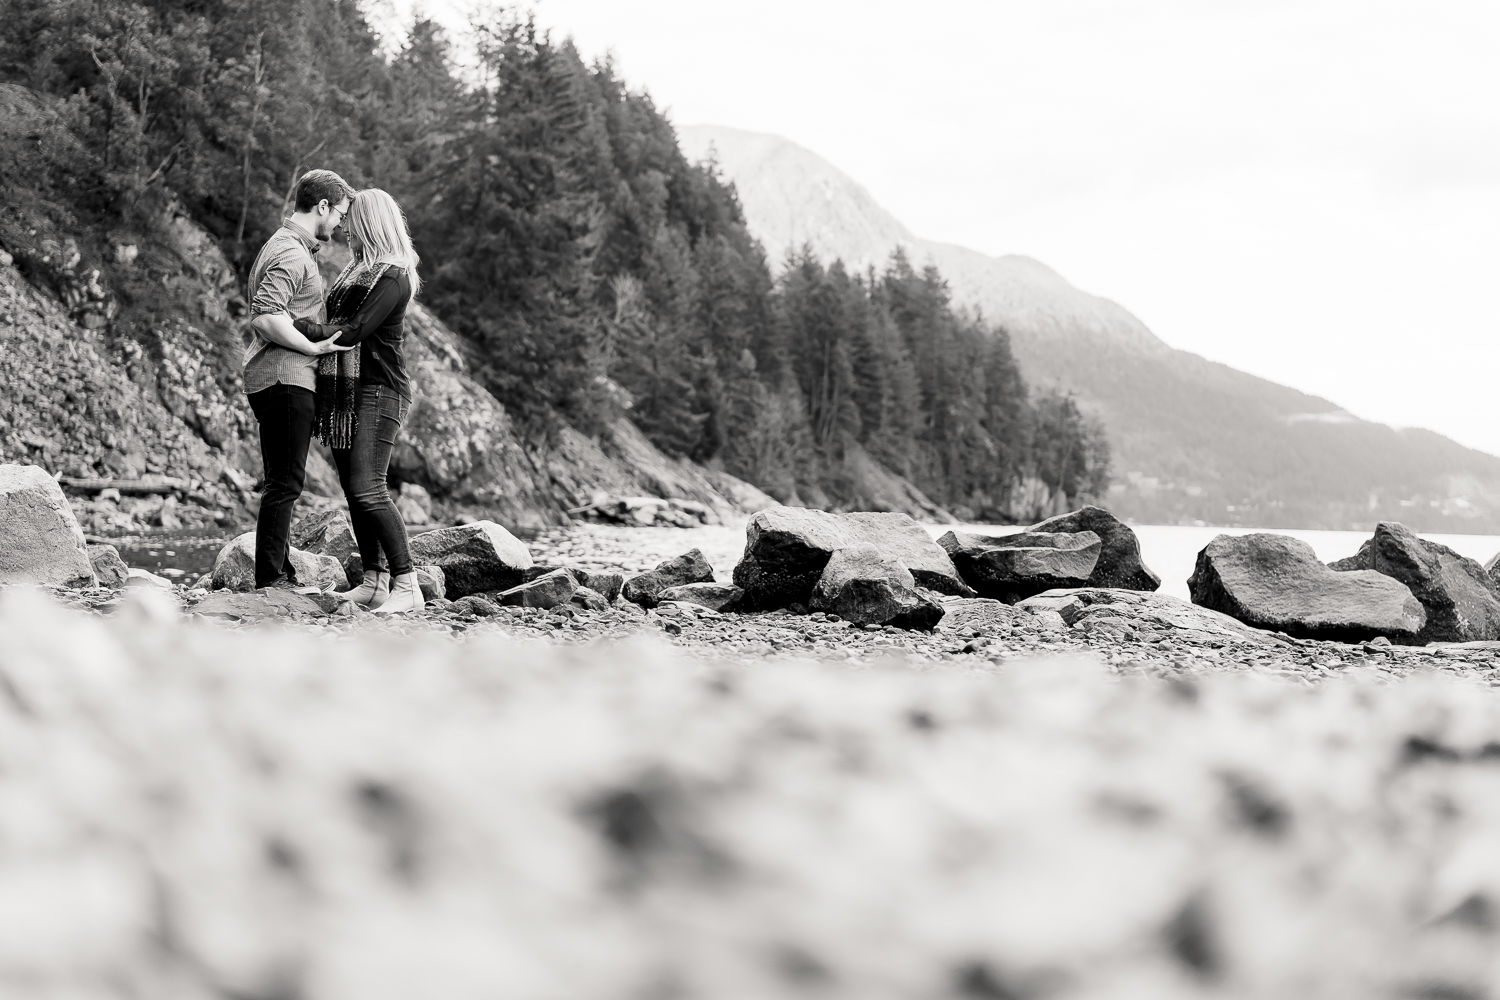 North Vancouver Engagement Photos